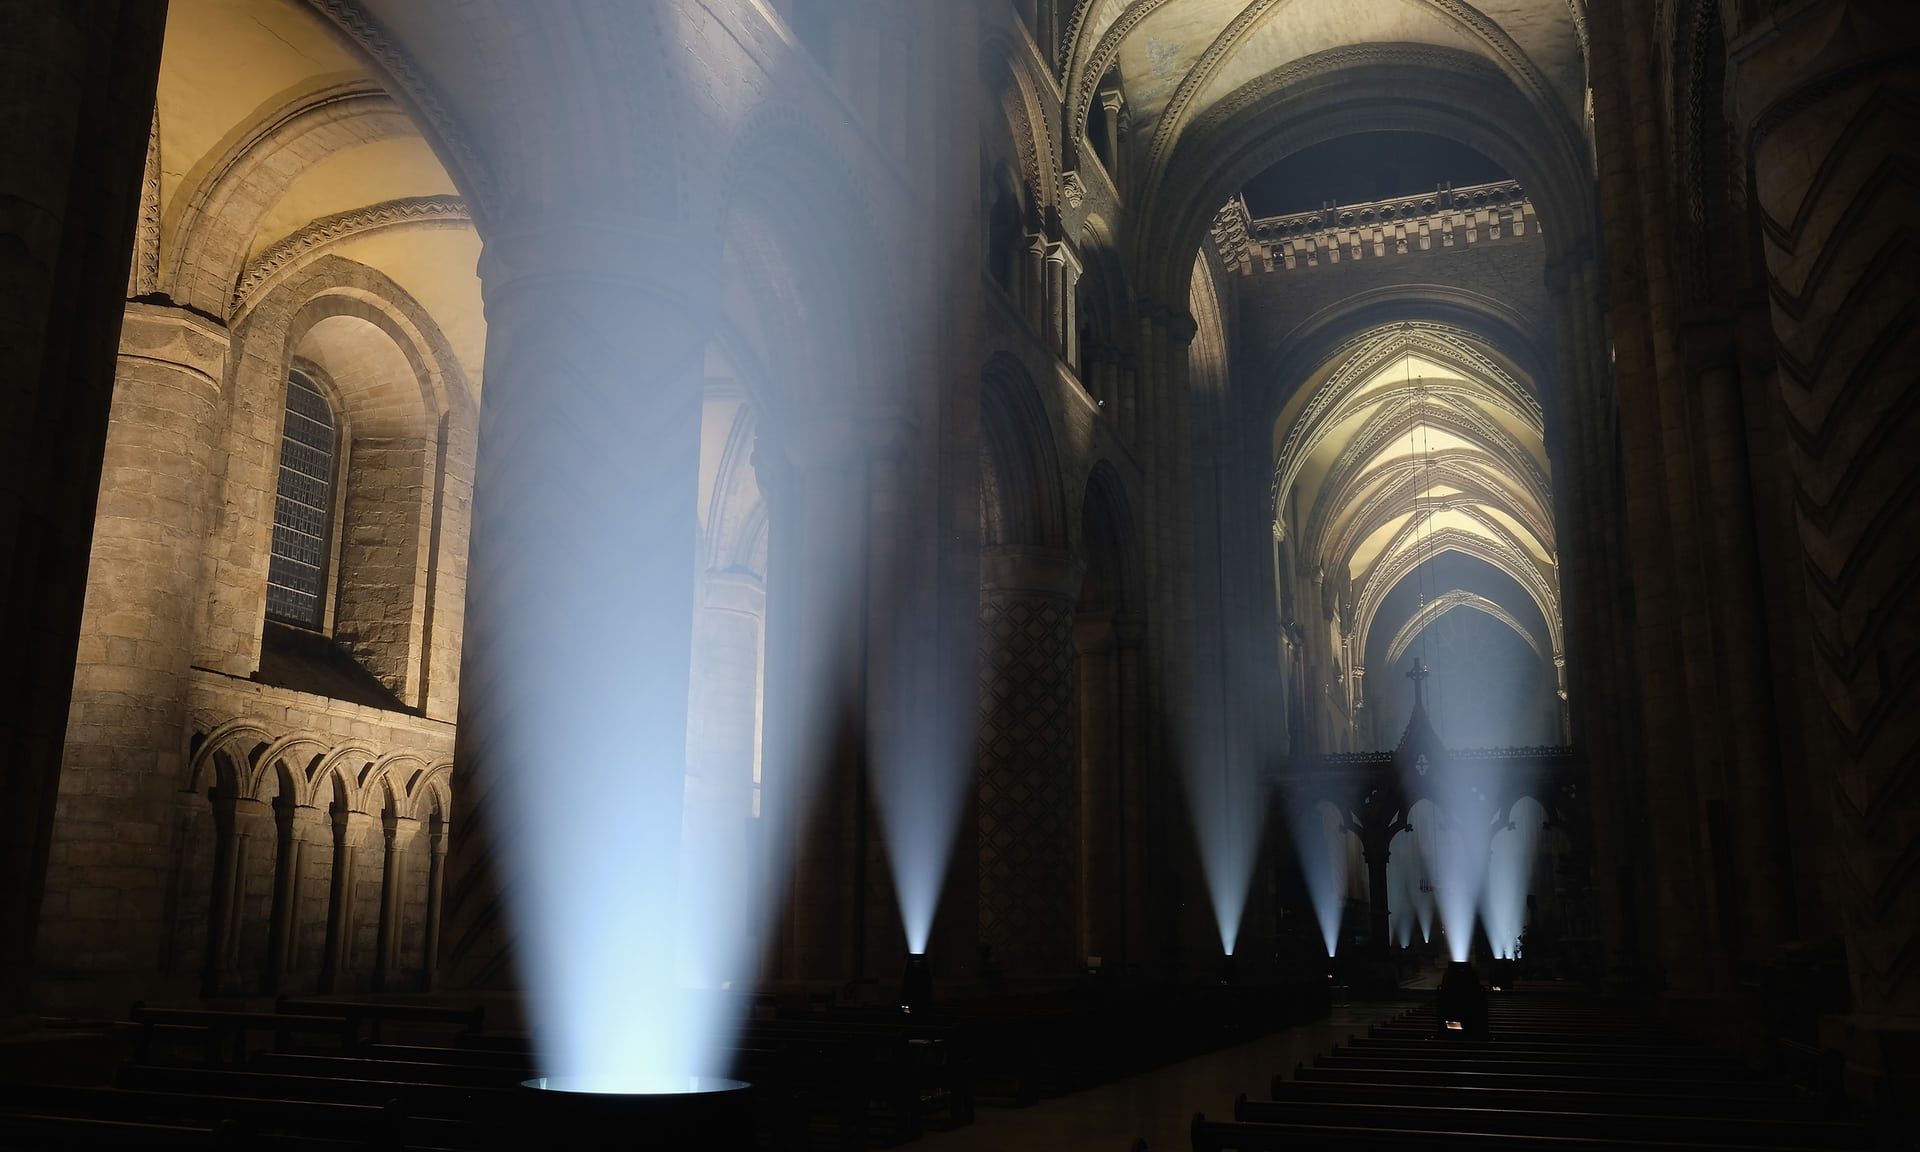 Bellringers to create dazzling light show at Durham Cathedral